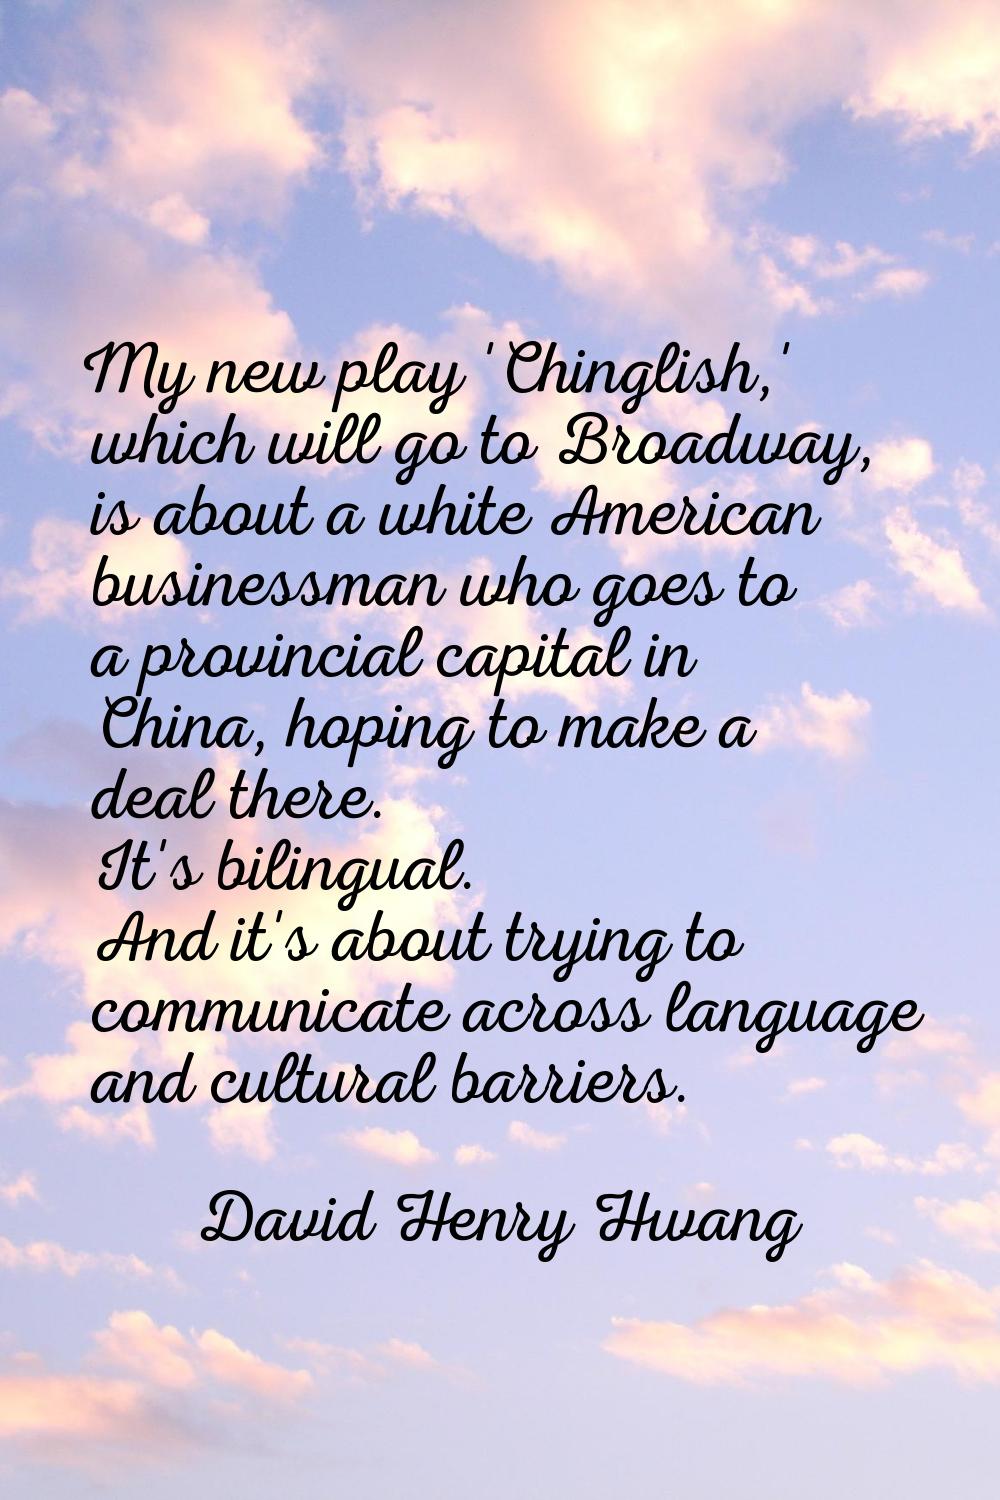 My new play 'Chinglish,' which will go to Broadway, is about a white American businessman who goes 